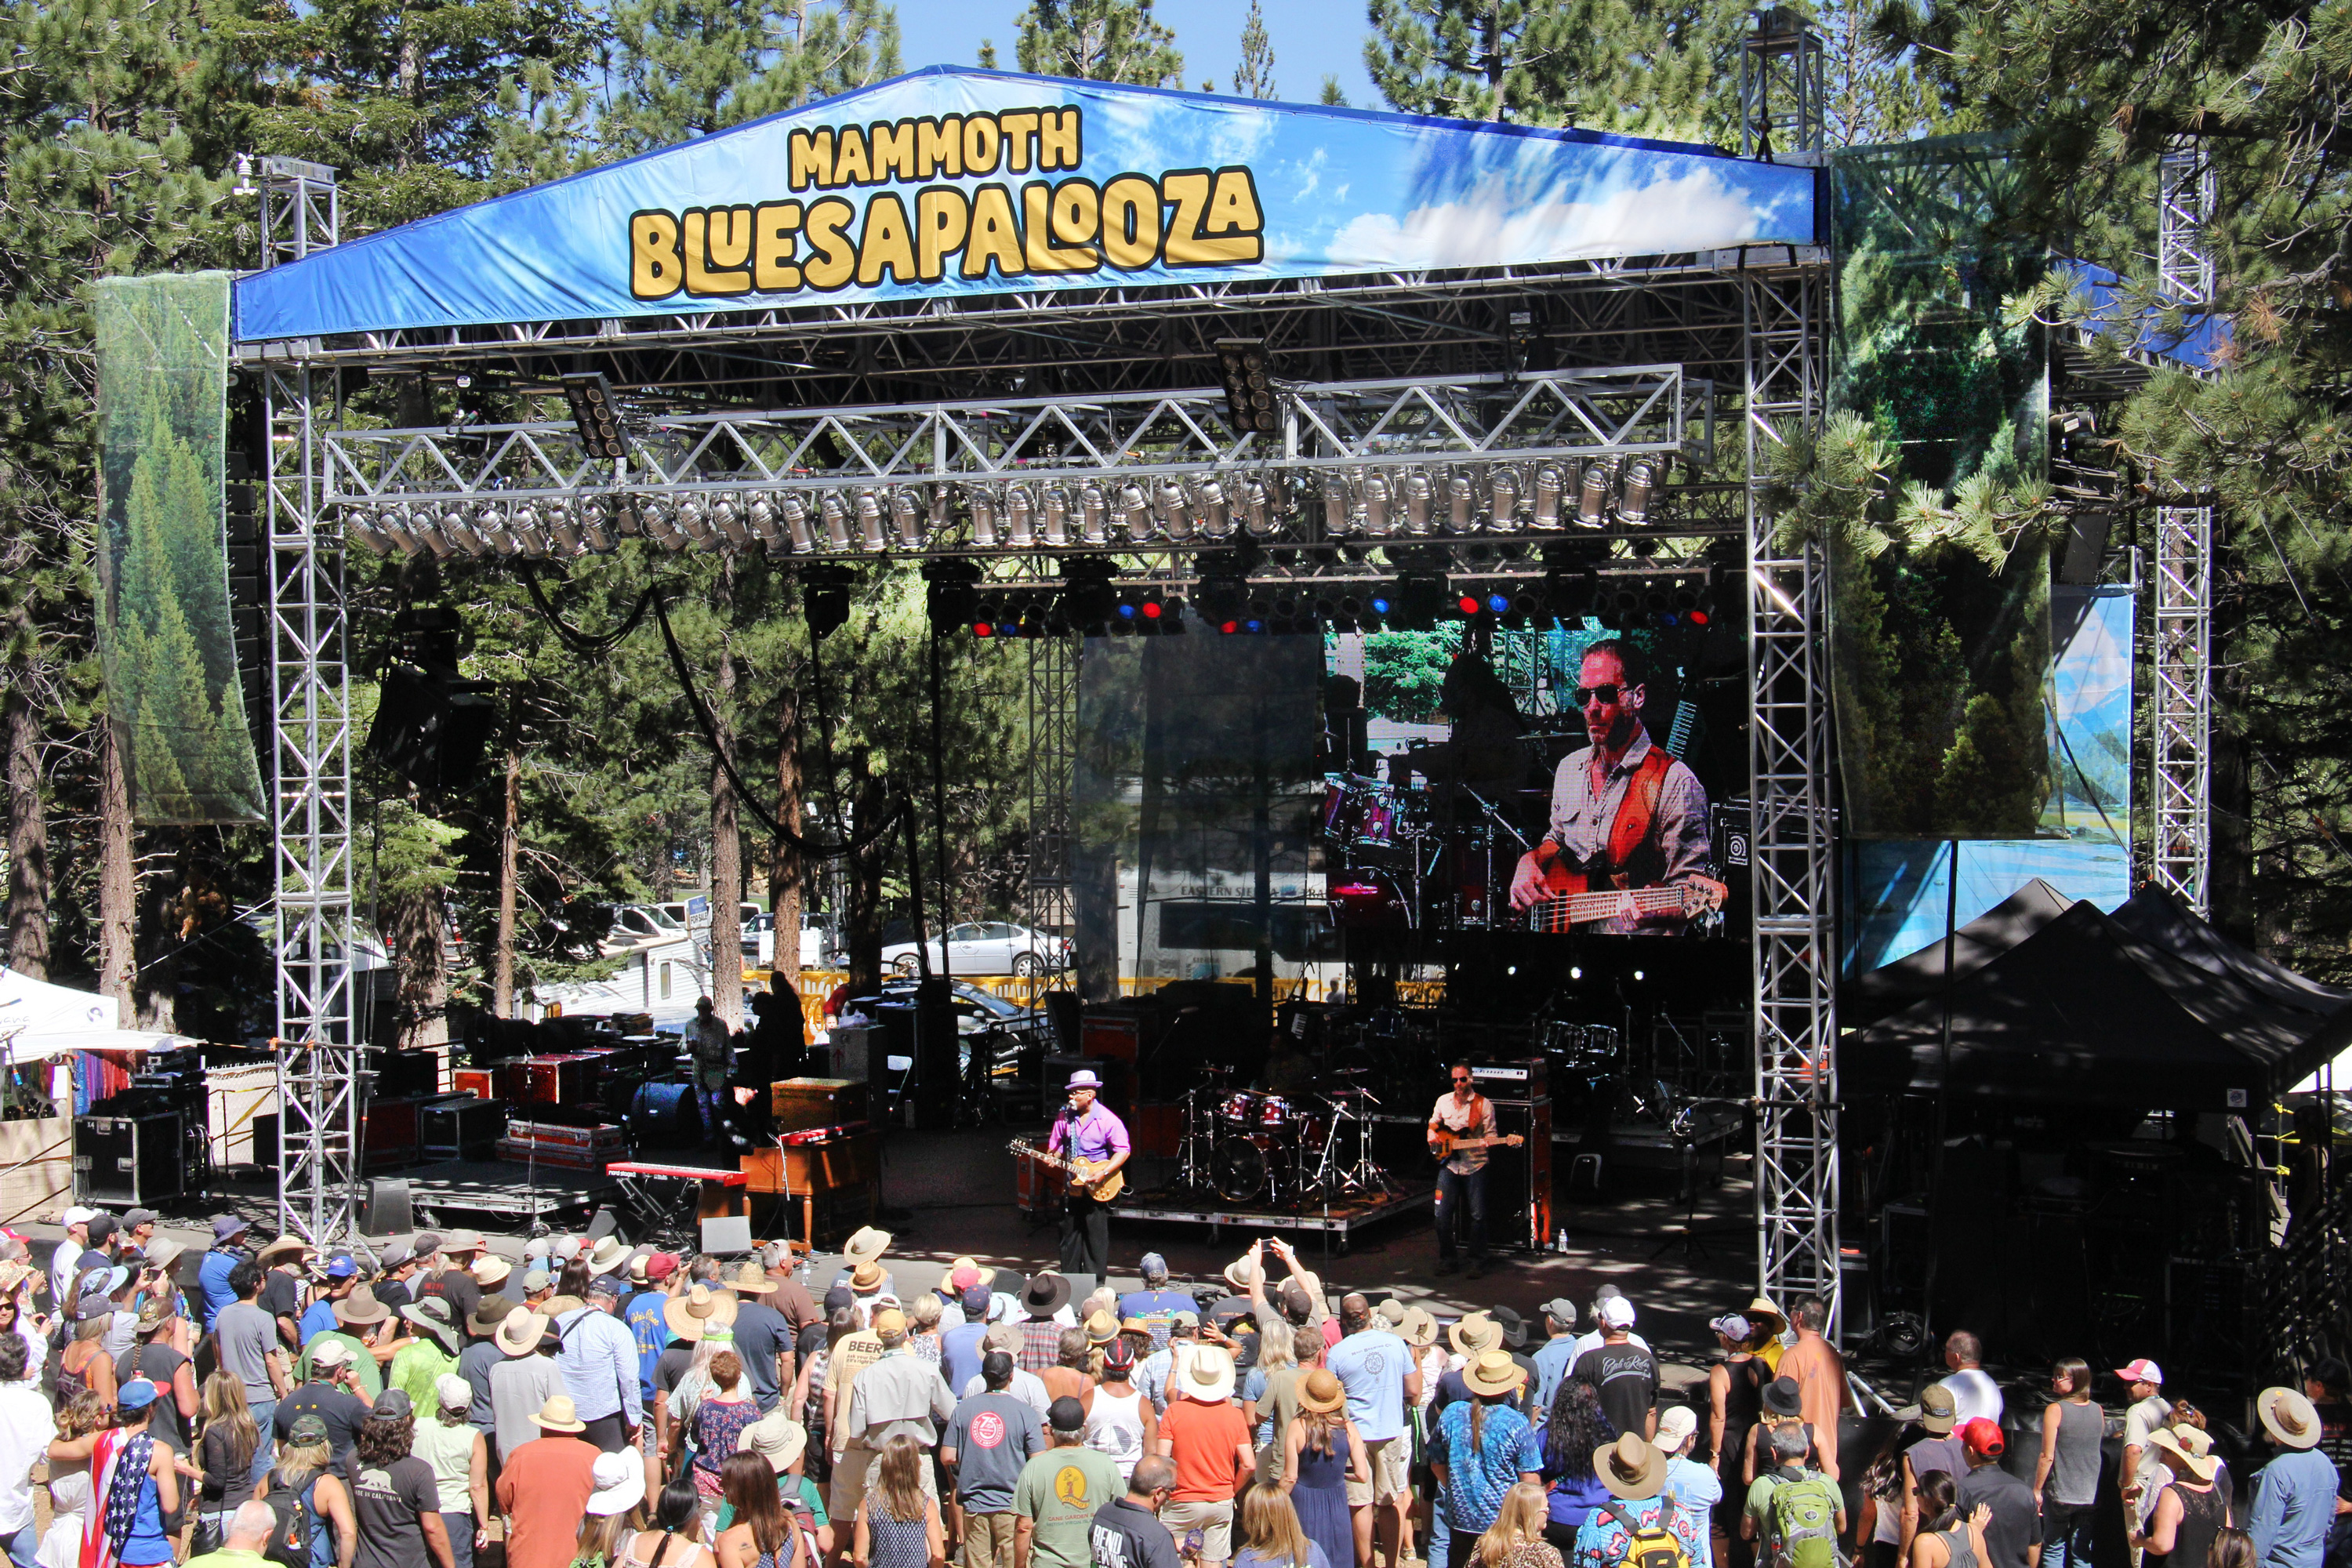 Mammoth Festival of Beers and Bluesapalooza Announces the 2019 Lineup